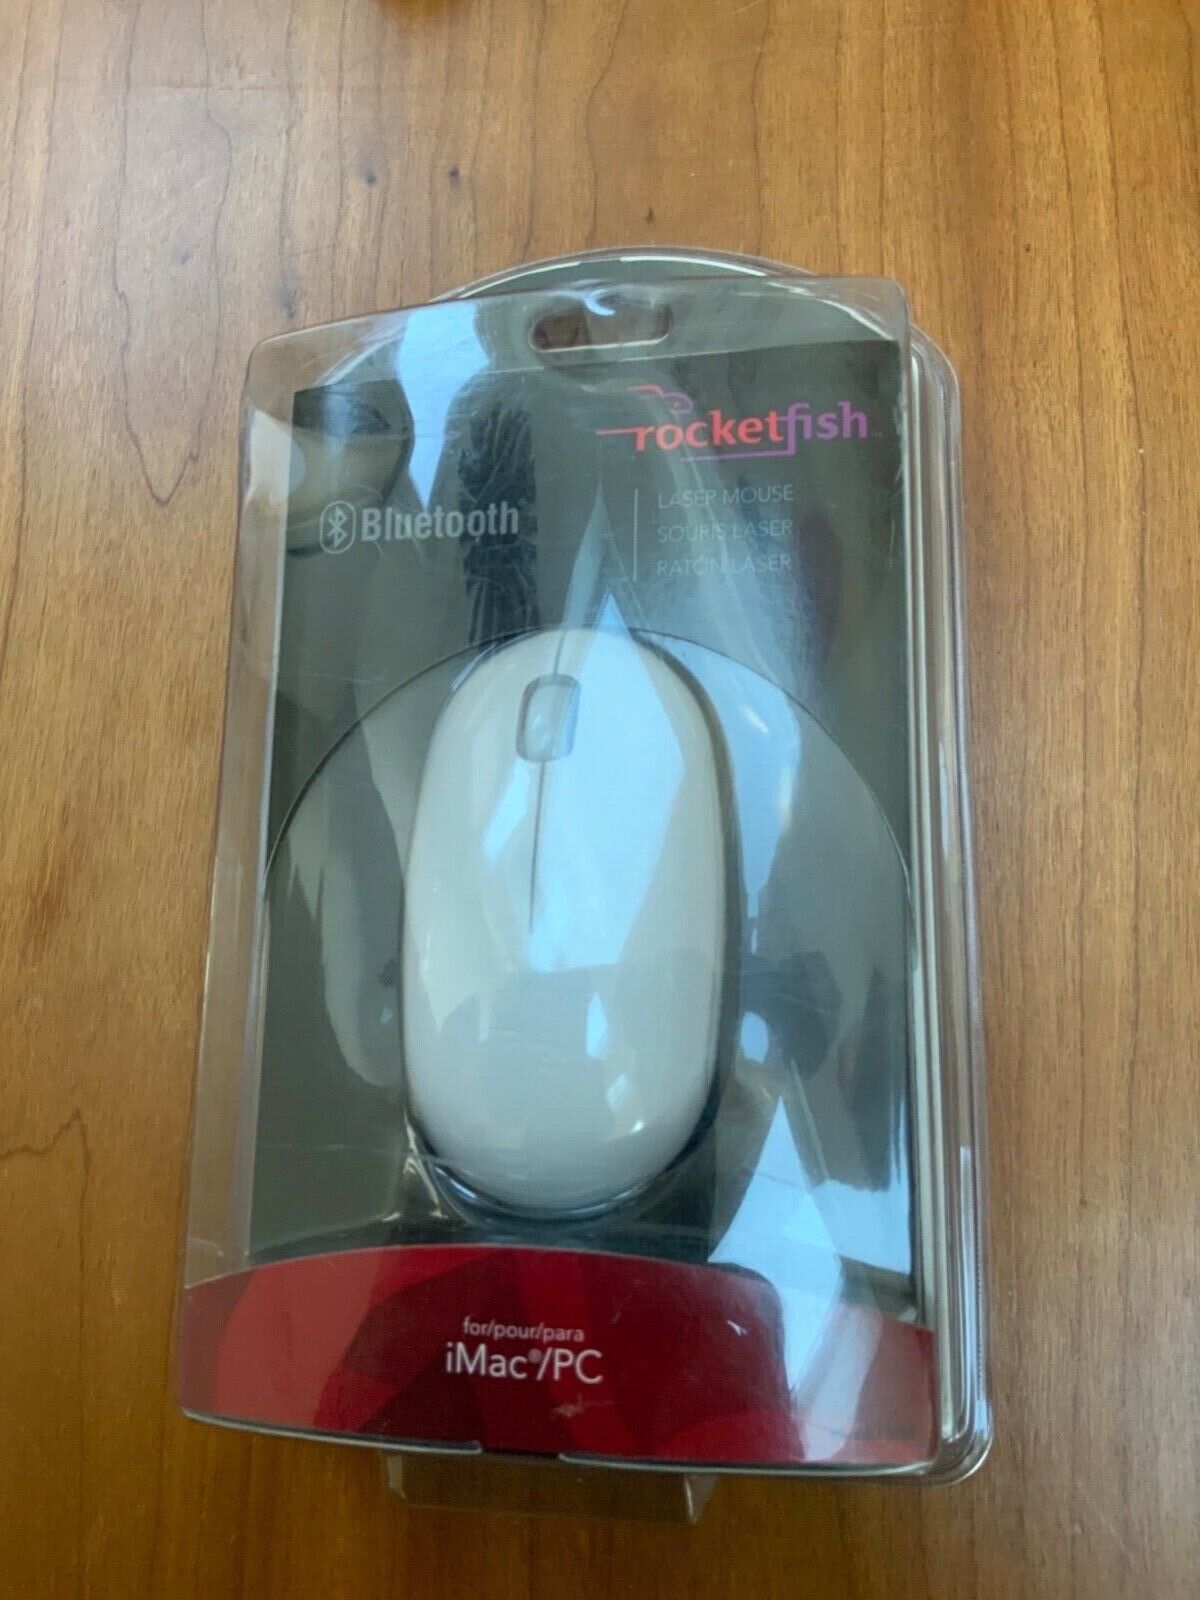 Rocketfish Bluetooth Wireless Laser Mouse for Macbook / Pc New in package 